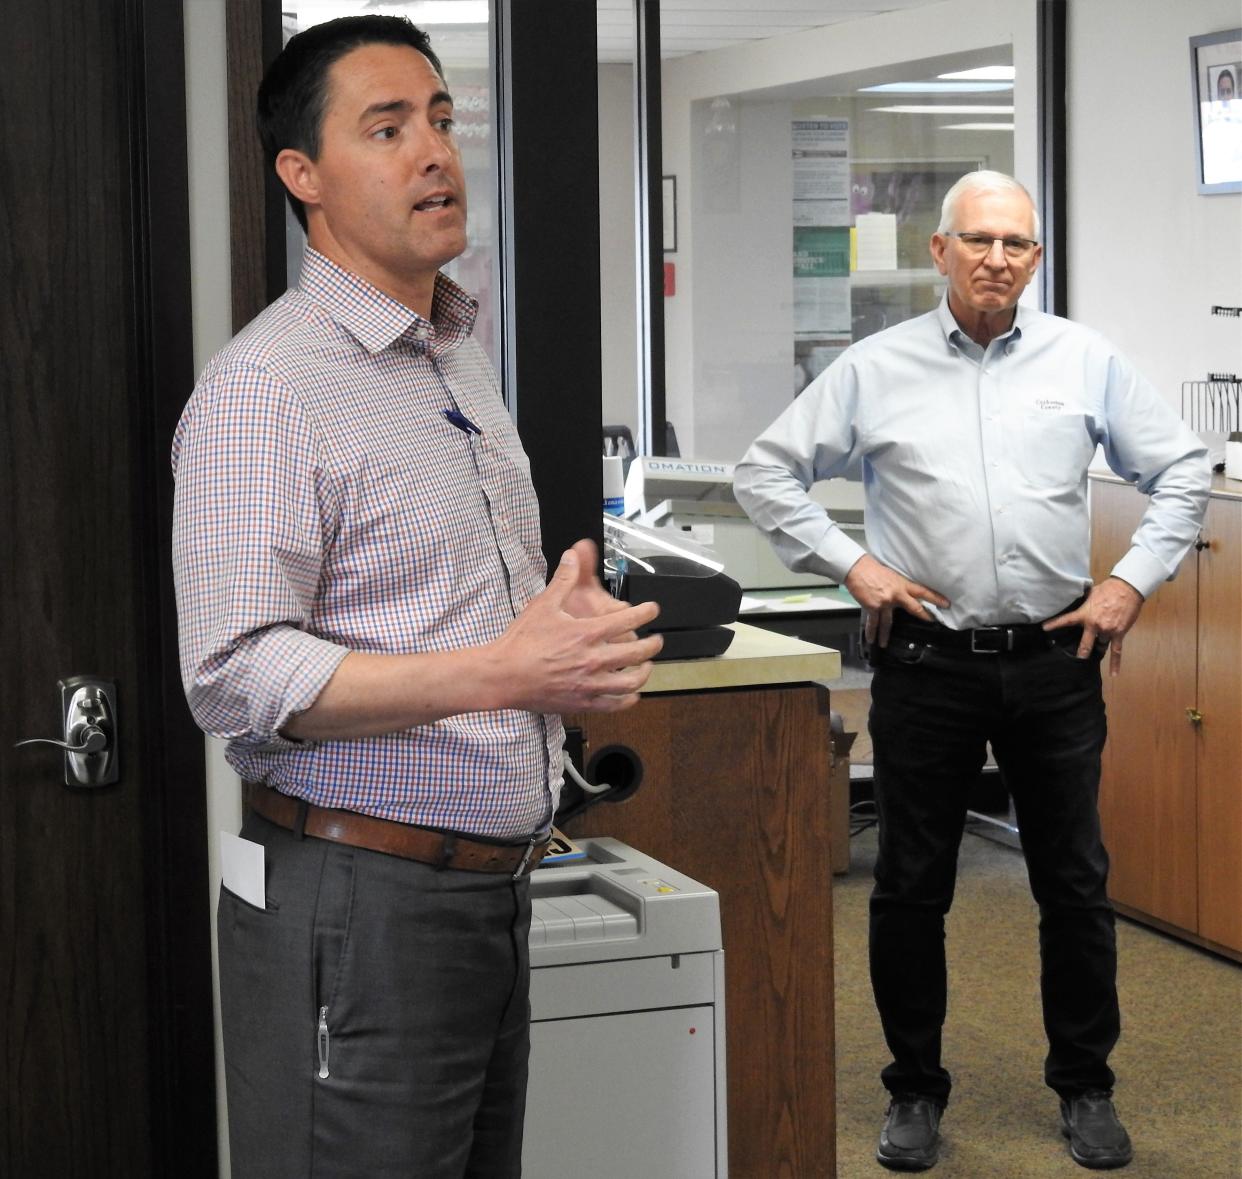 Ohio Secretary of State Frank LaRose speaks while Commissioner Dane Shryock listens on Tuesday at the Coshocton County Board of Elections. LaRose made a routine stop to see if the board was ready for the May 3 primary.